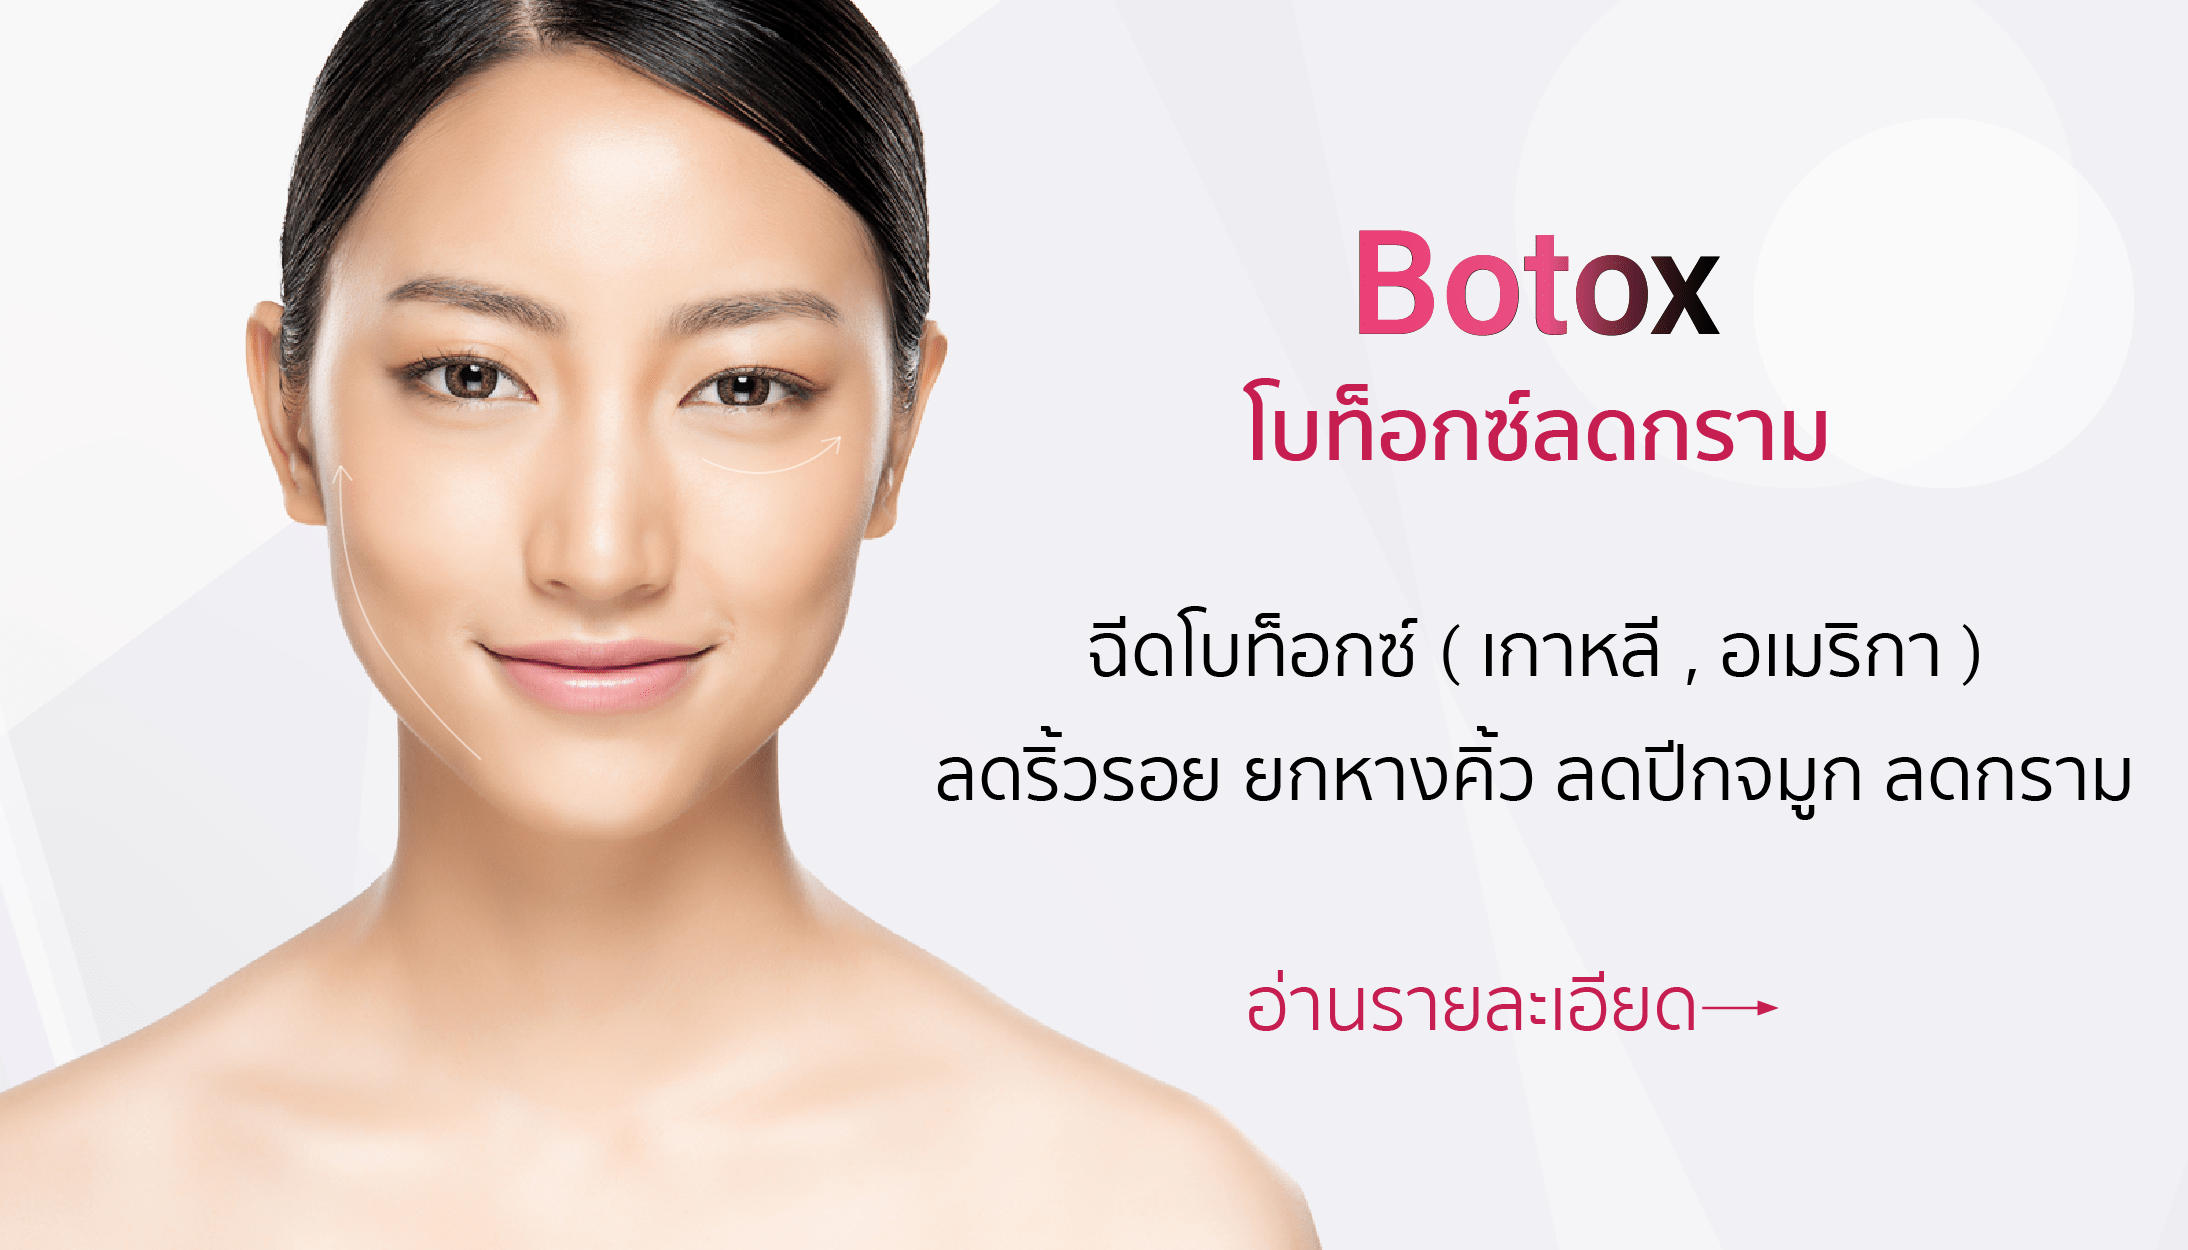 Skin and Laser service in Thailand